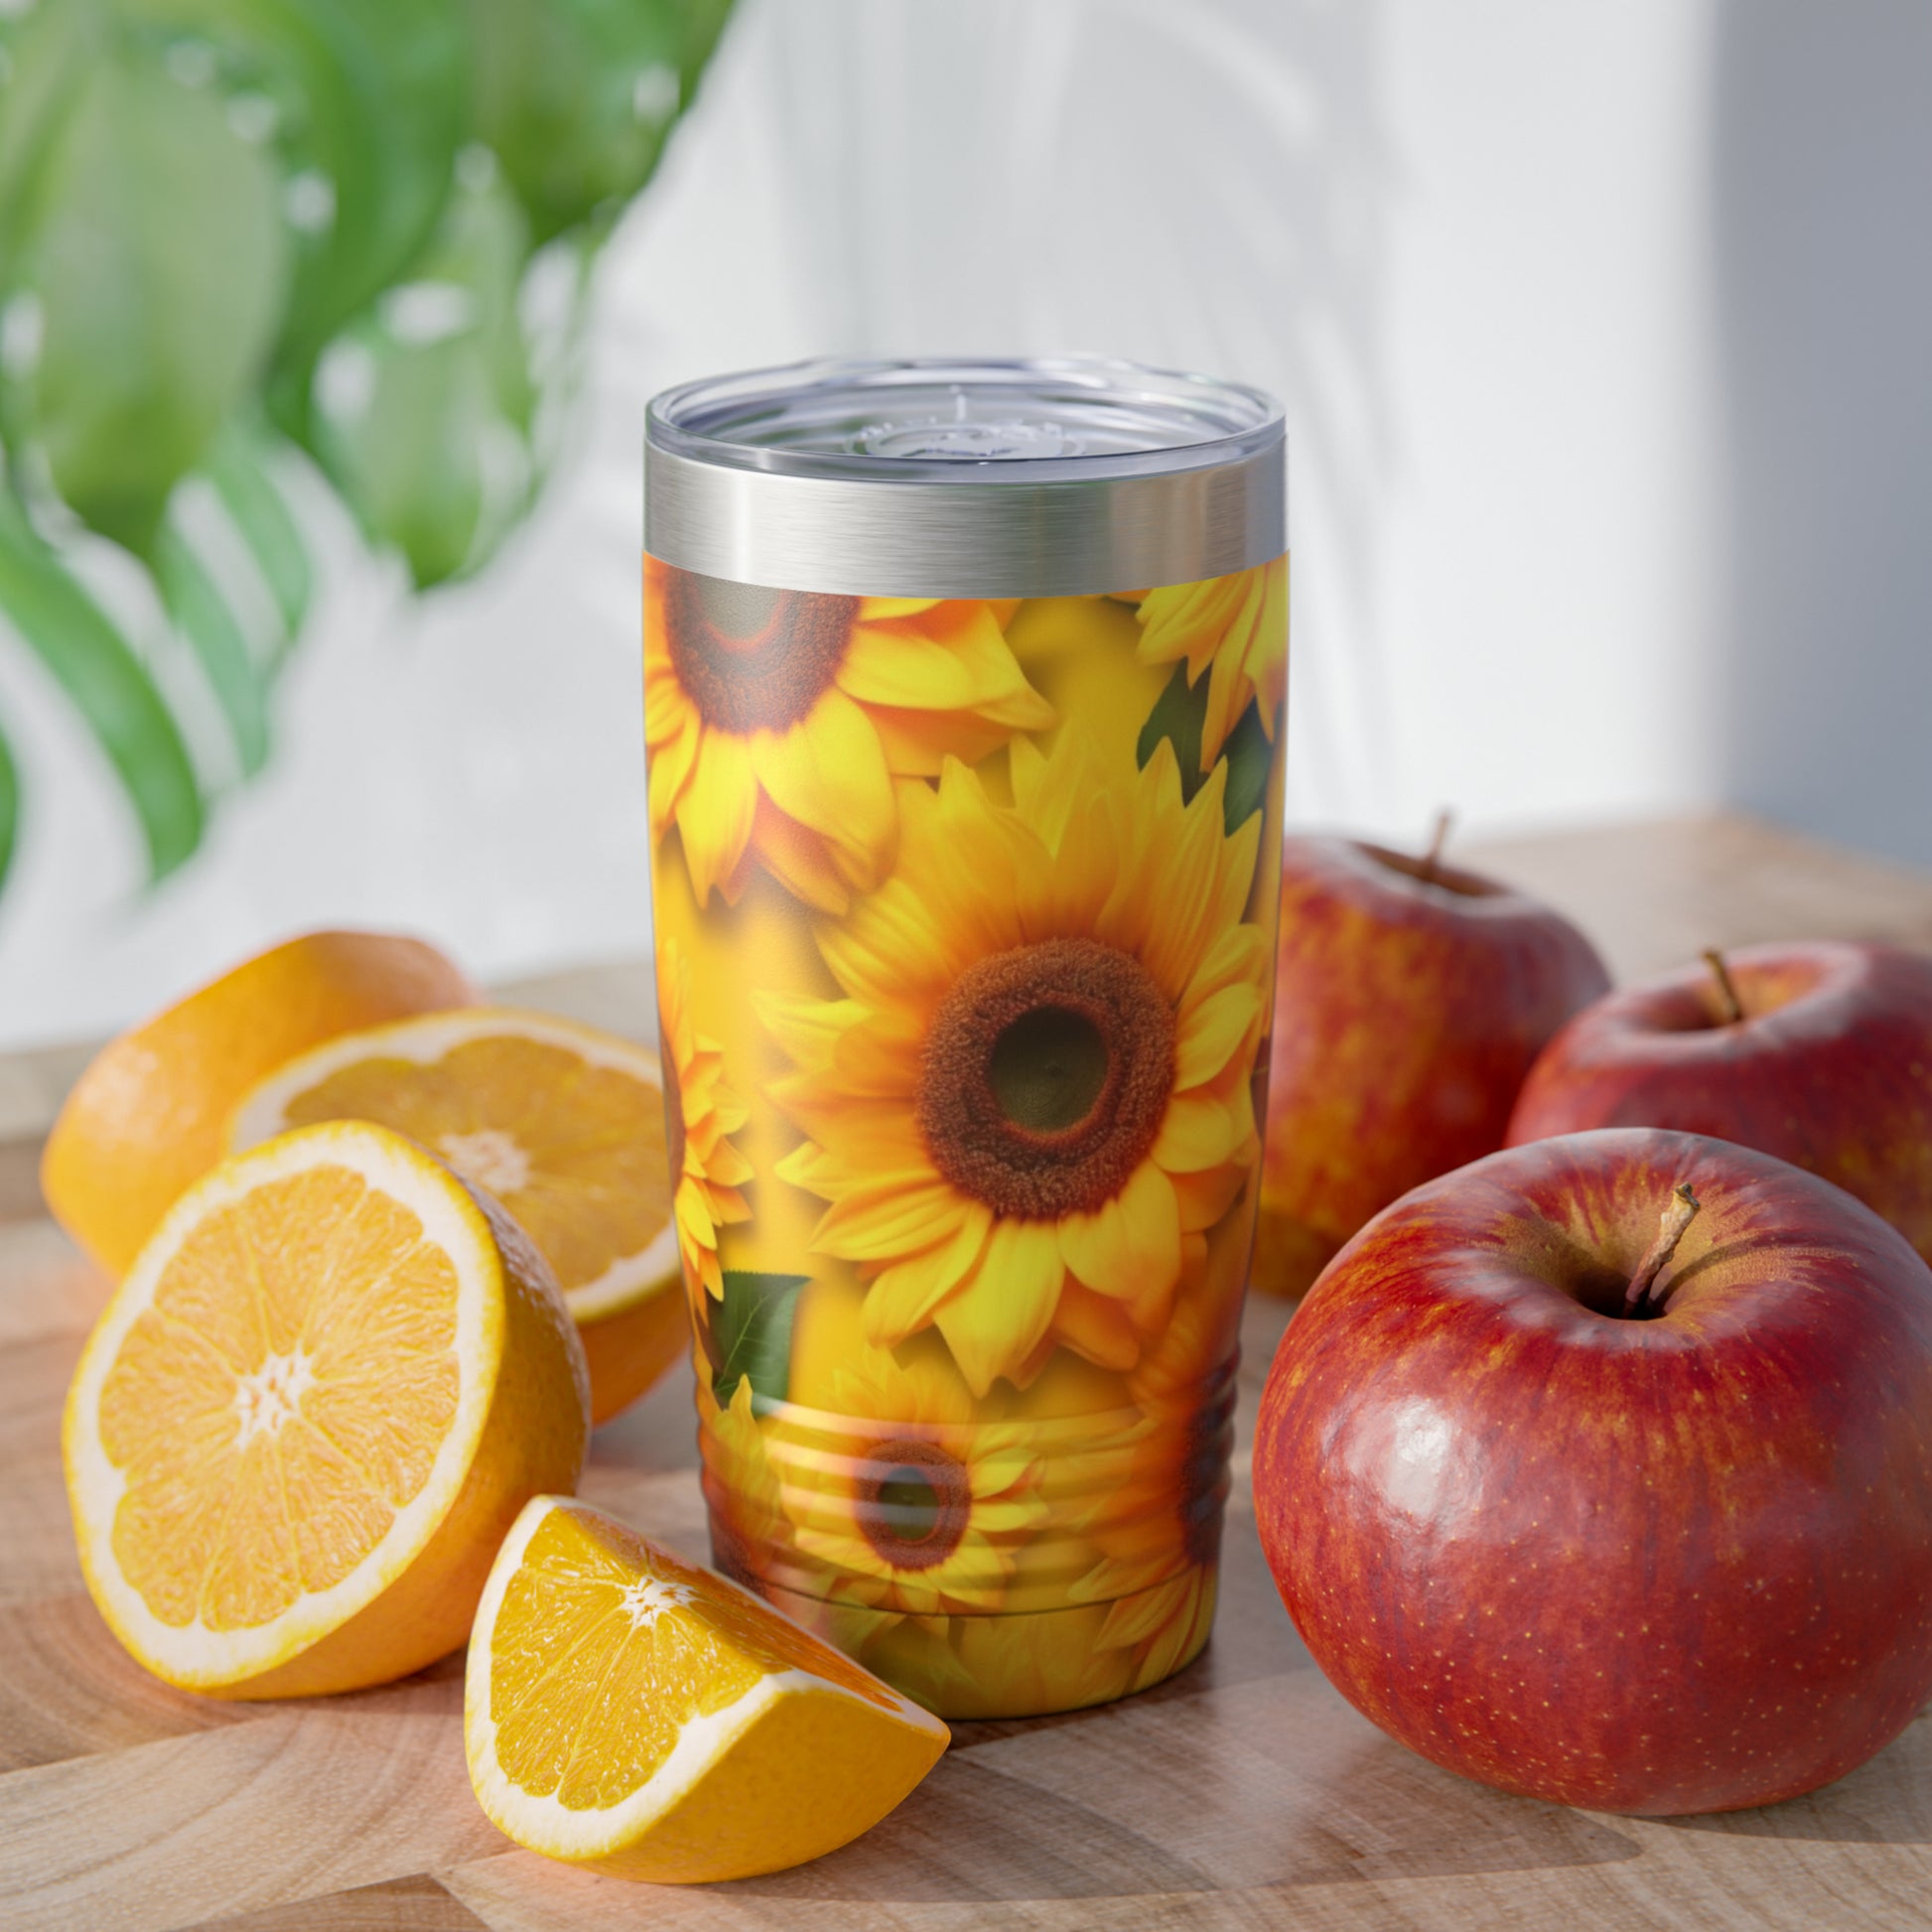 3D Sunflower Tumbler Stainless Steel 20oz, Floral Ringneck Travel Mug Lid Eco Friendly Cup Flask Vacuum Coffee Office Men Women Starcove Fashion